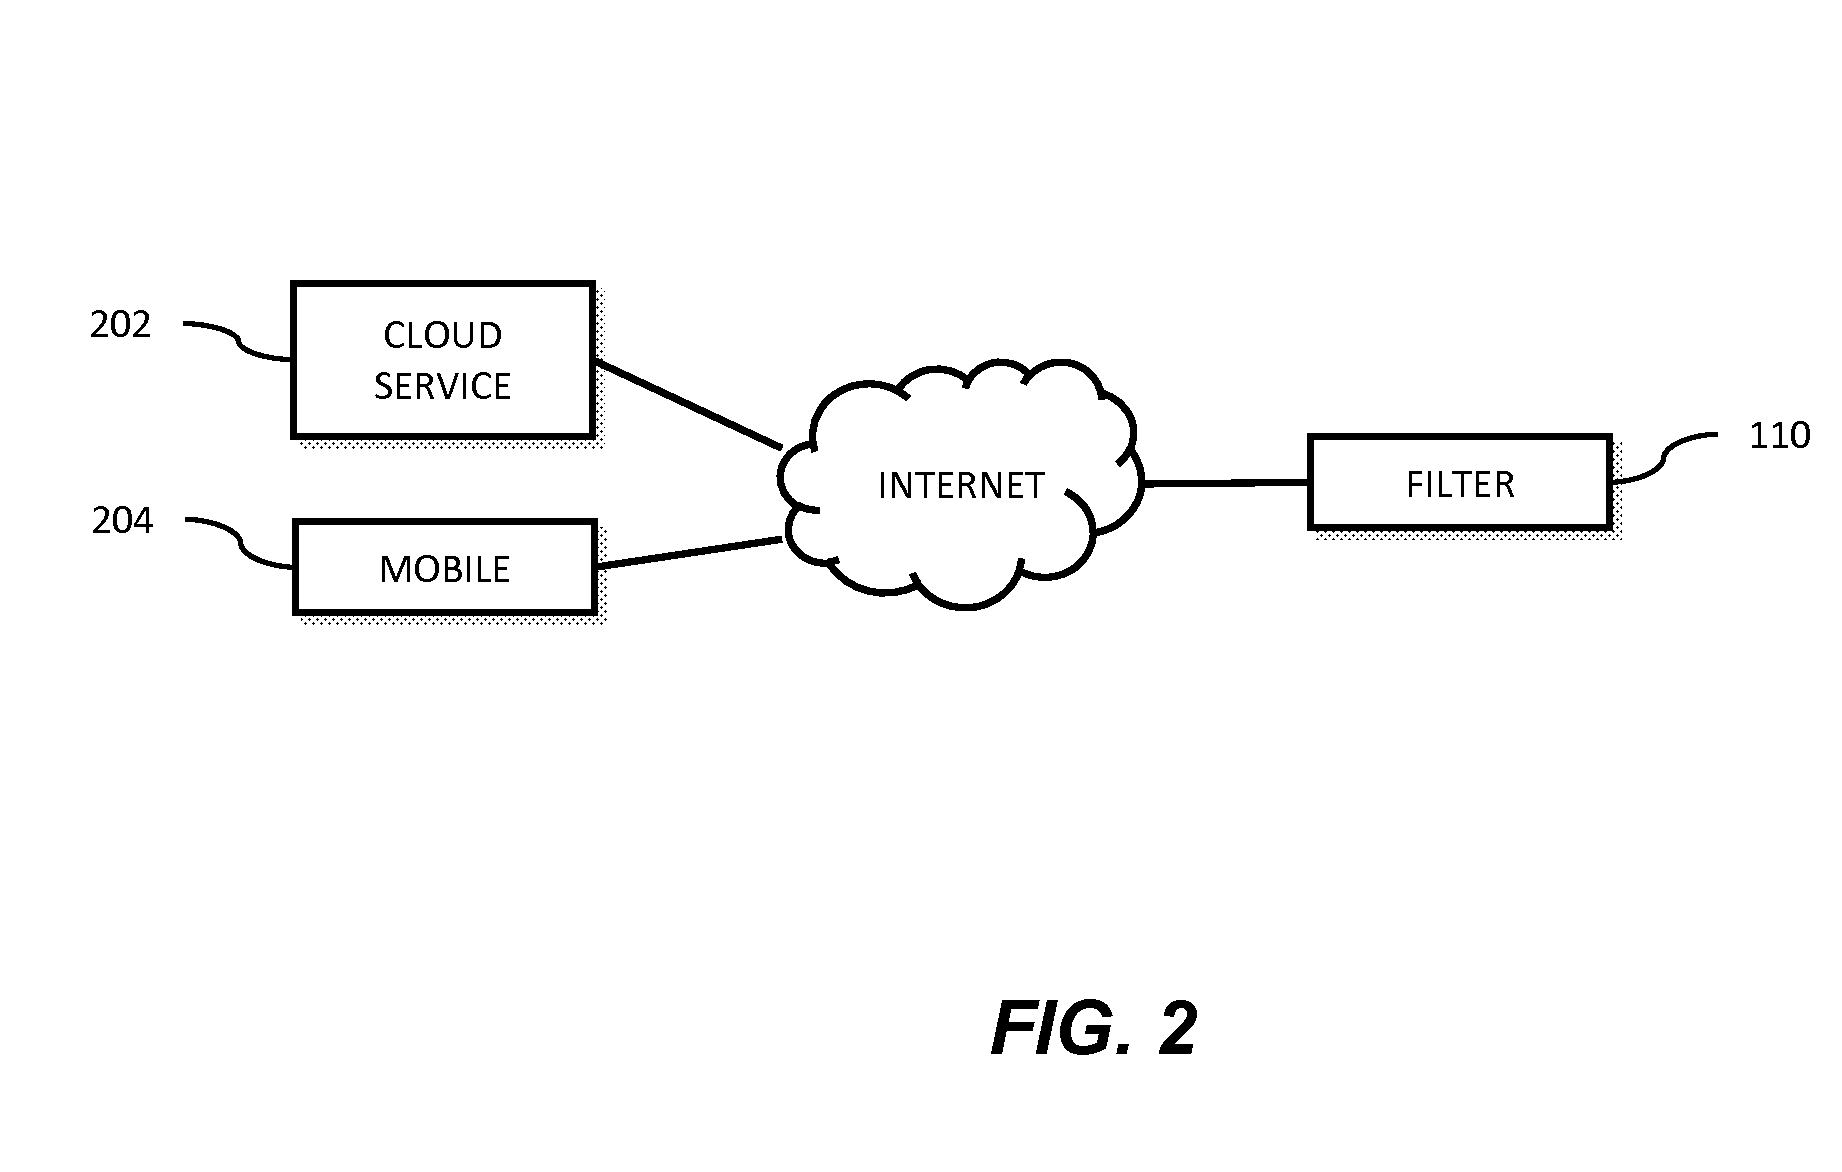 System and method for managing, controlling and configuring an intelligent parental control filter